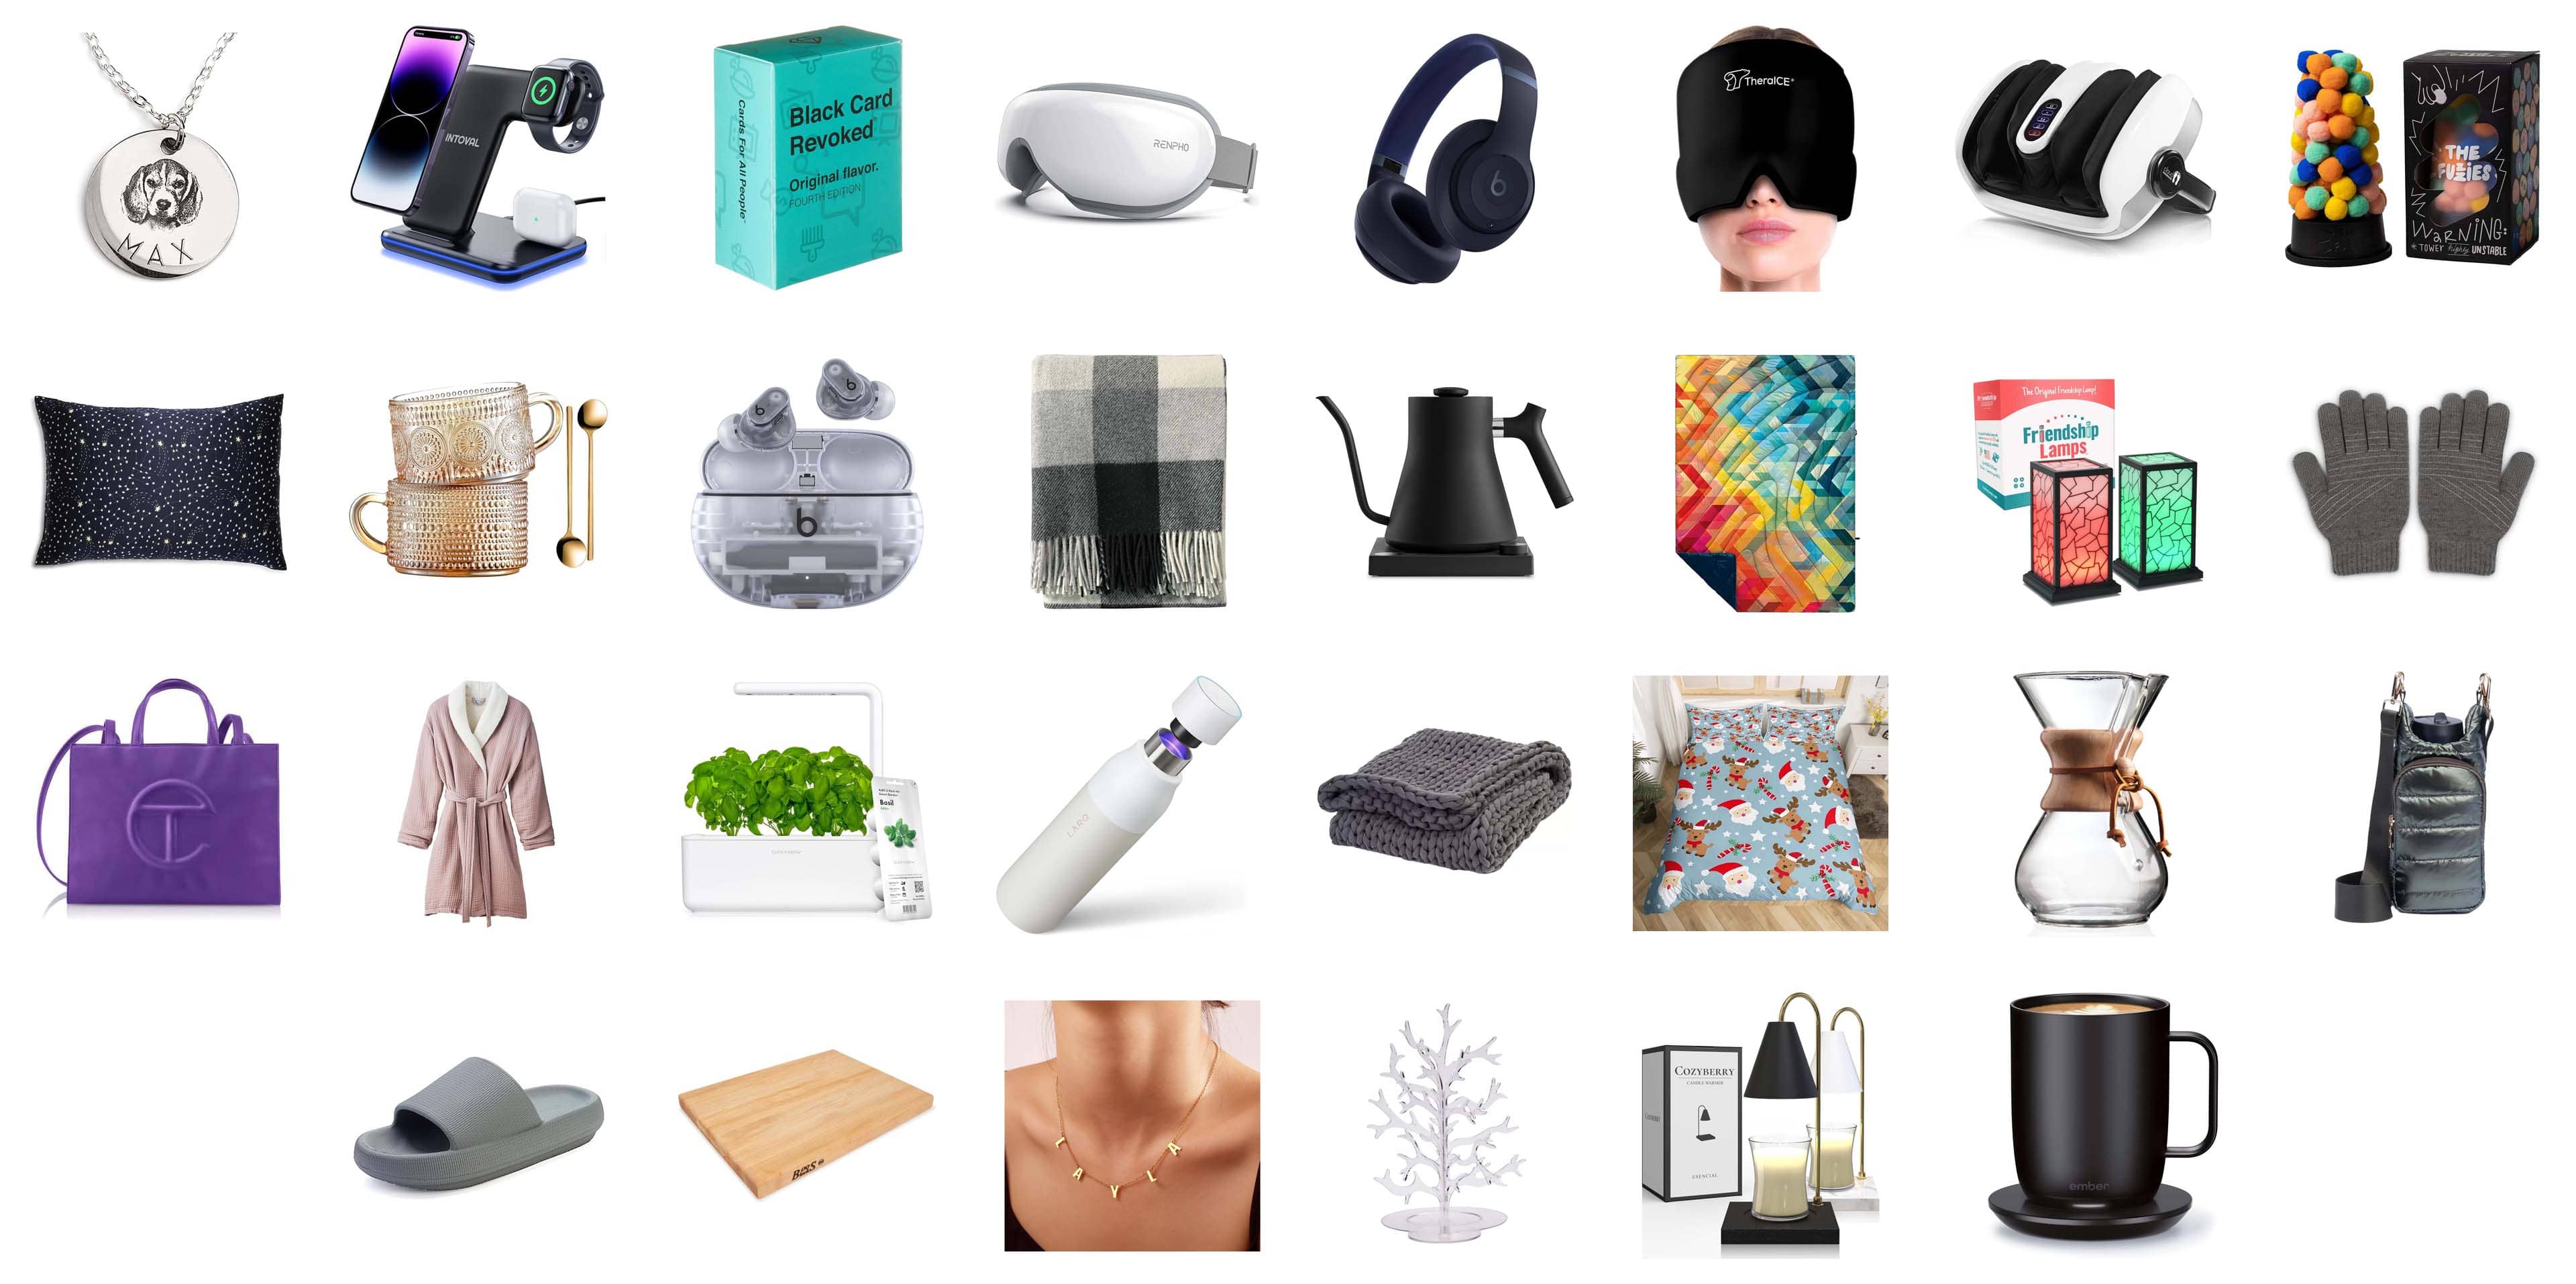 20 Unique #Gifts Ideas for Techie #Parents! | Gifts for techies, New  electronic gadgets, Electronic gadgets for men